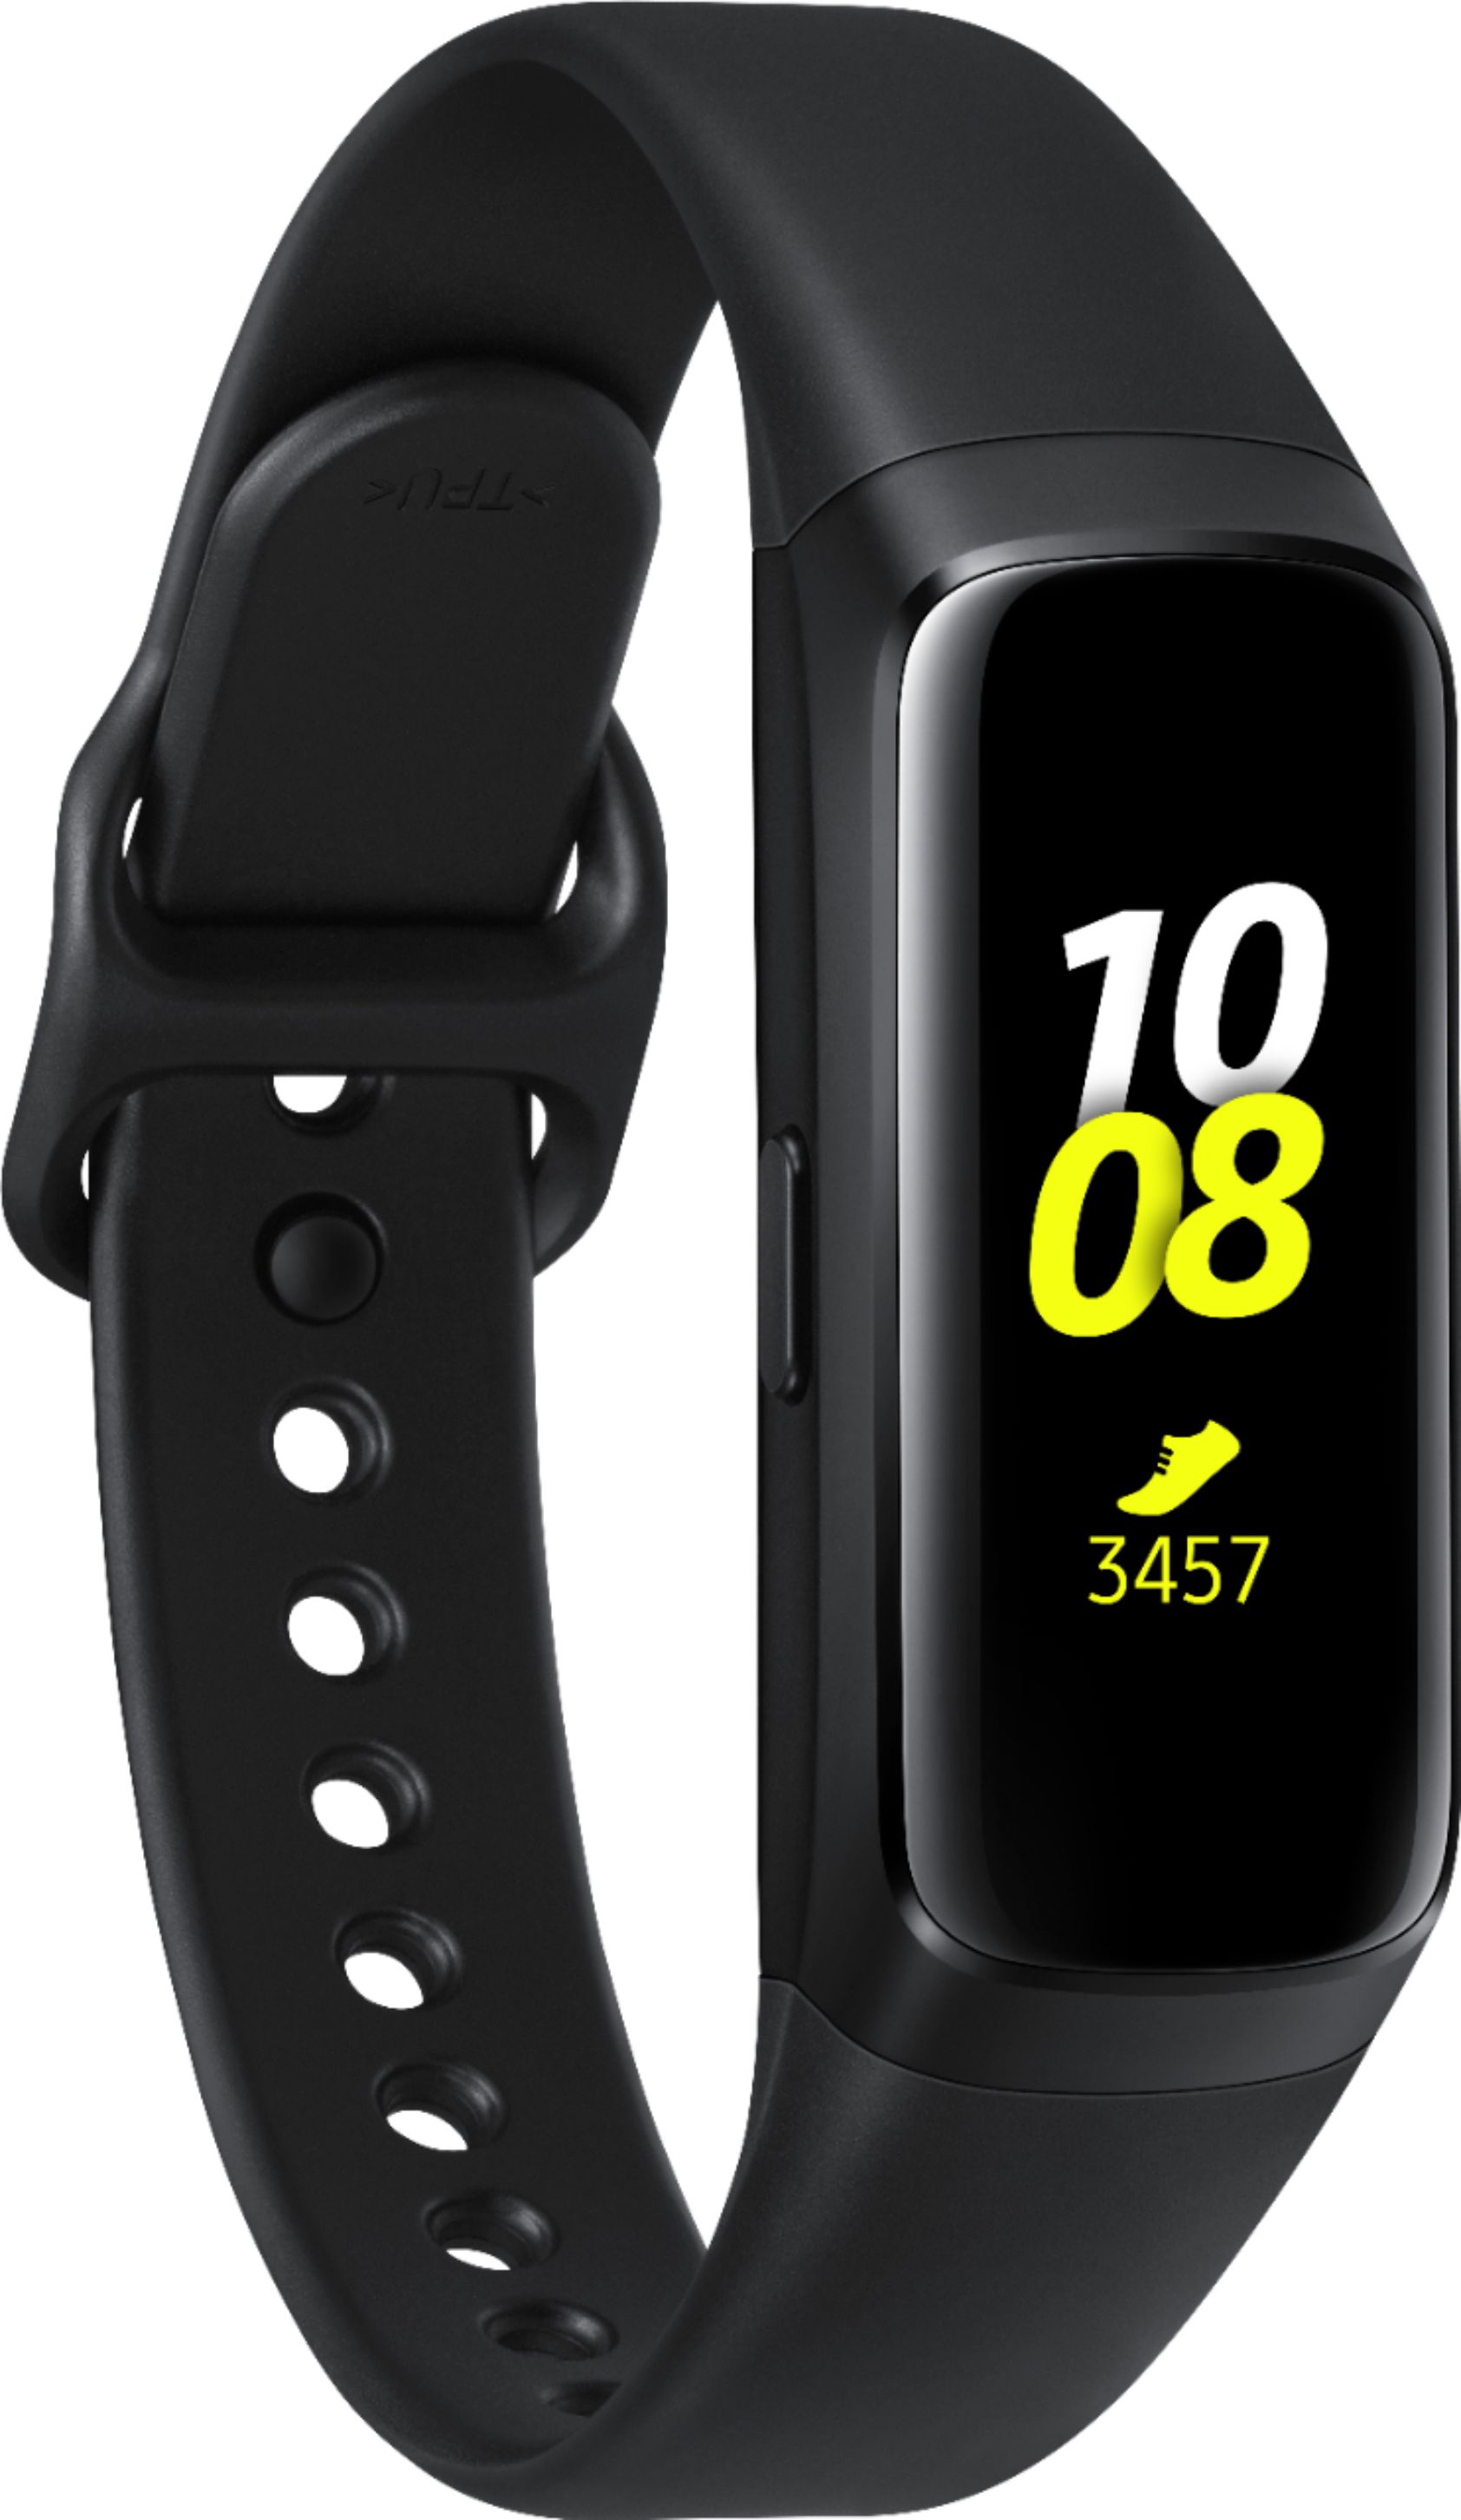 cost of fitness band